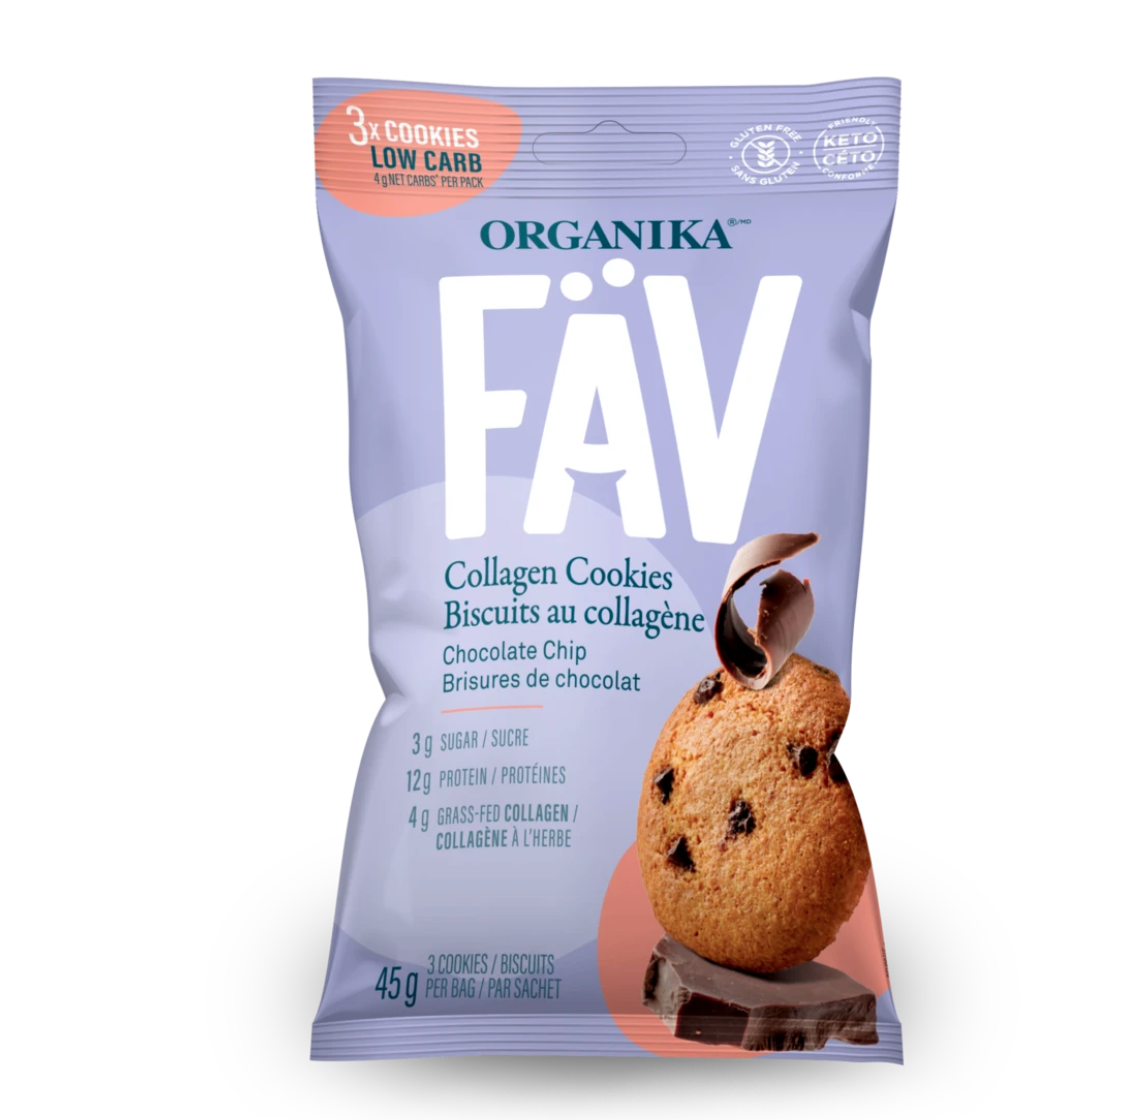 Organika Fäv Collagen Cookie - Chocolate Chip, $14.97 for a 3 pack